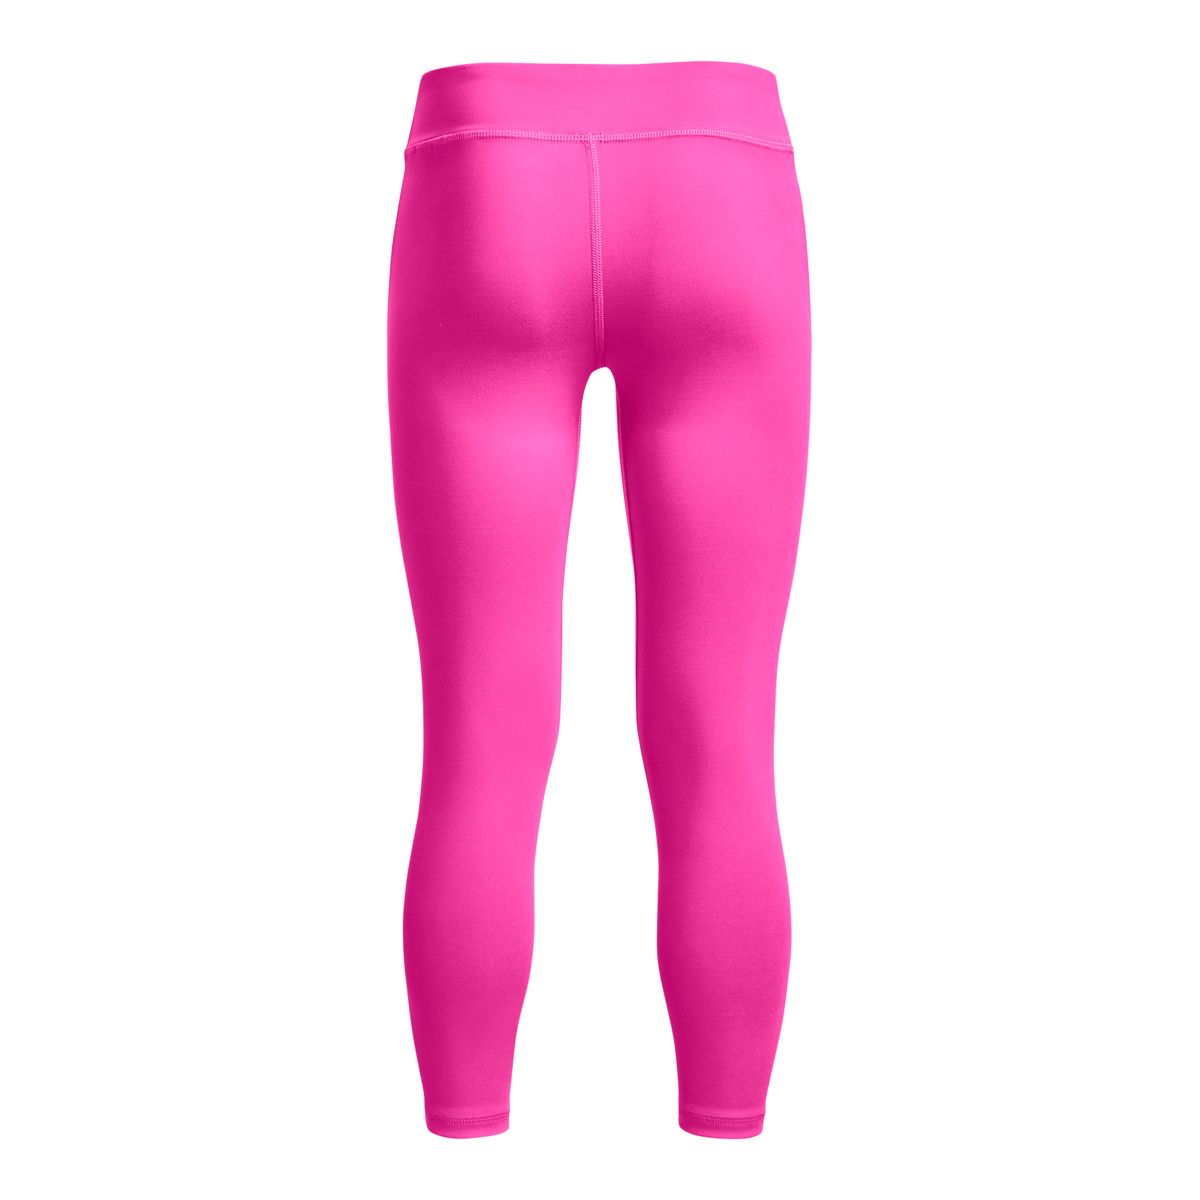 https://media-www.sportchek.ca/product/div-03-softgoods/dpt-72-casual-clothing/sdpt-04-girls/333975178/ua-motion-solid-ankle-crop-legging-rebel-q123--2bb4eed7-cbfc-4a98-8835-27a2bf19f157-jpgrendition.jpg?imdensity=1&imwidth=1244&impolicy=mZoom